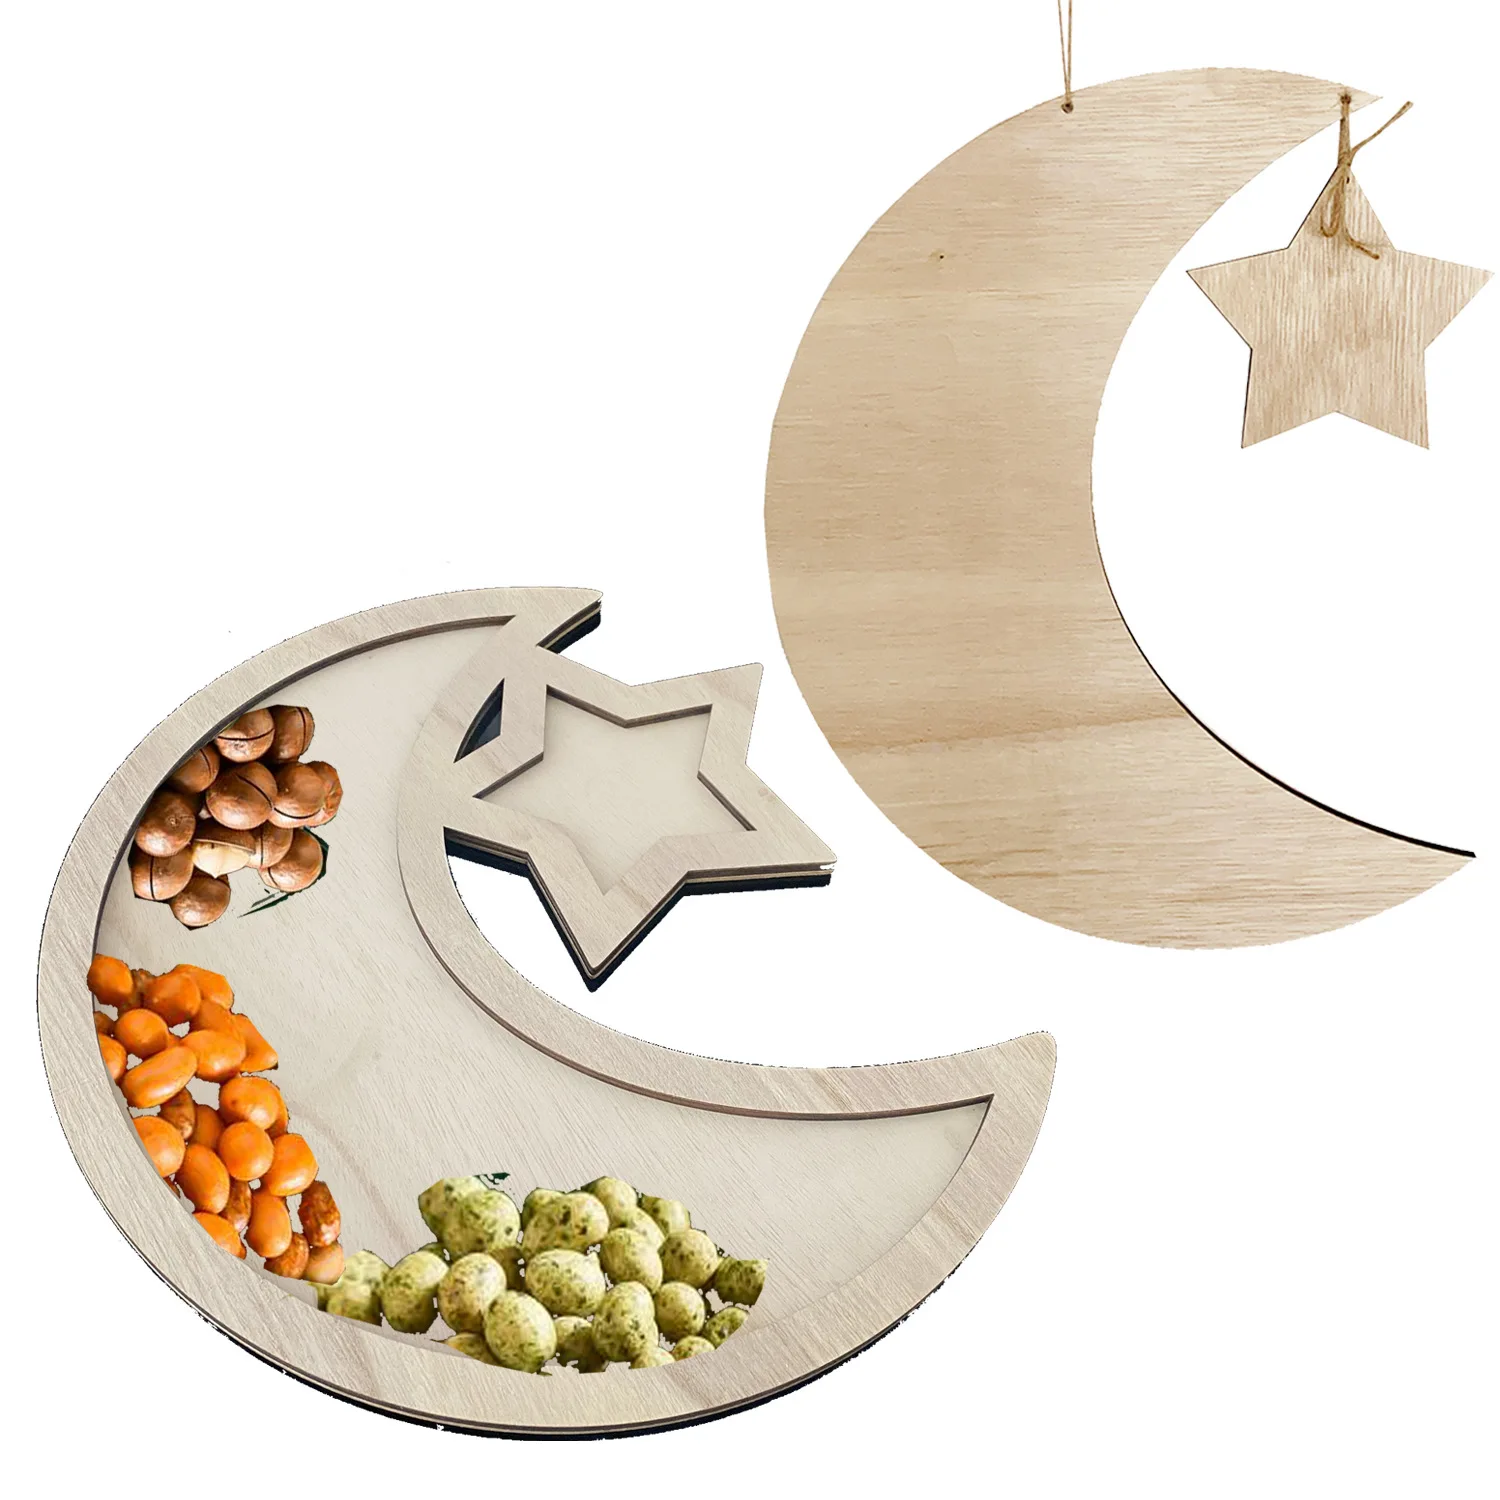 

Rustic Wooden Crescent Moon Star Eid Ramadan Party Food Serving Tableware Dessert Pastry Tray Display Holder Decor Ornament, Shown